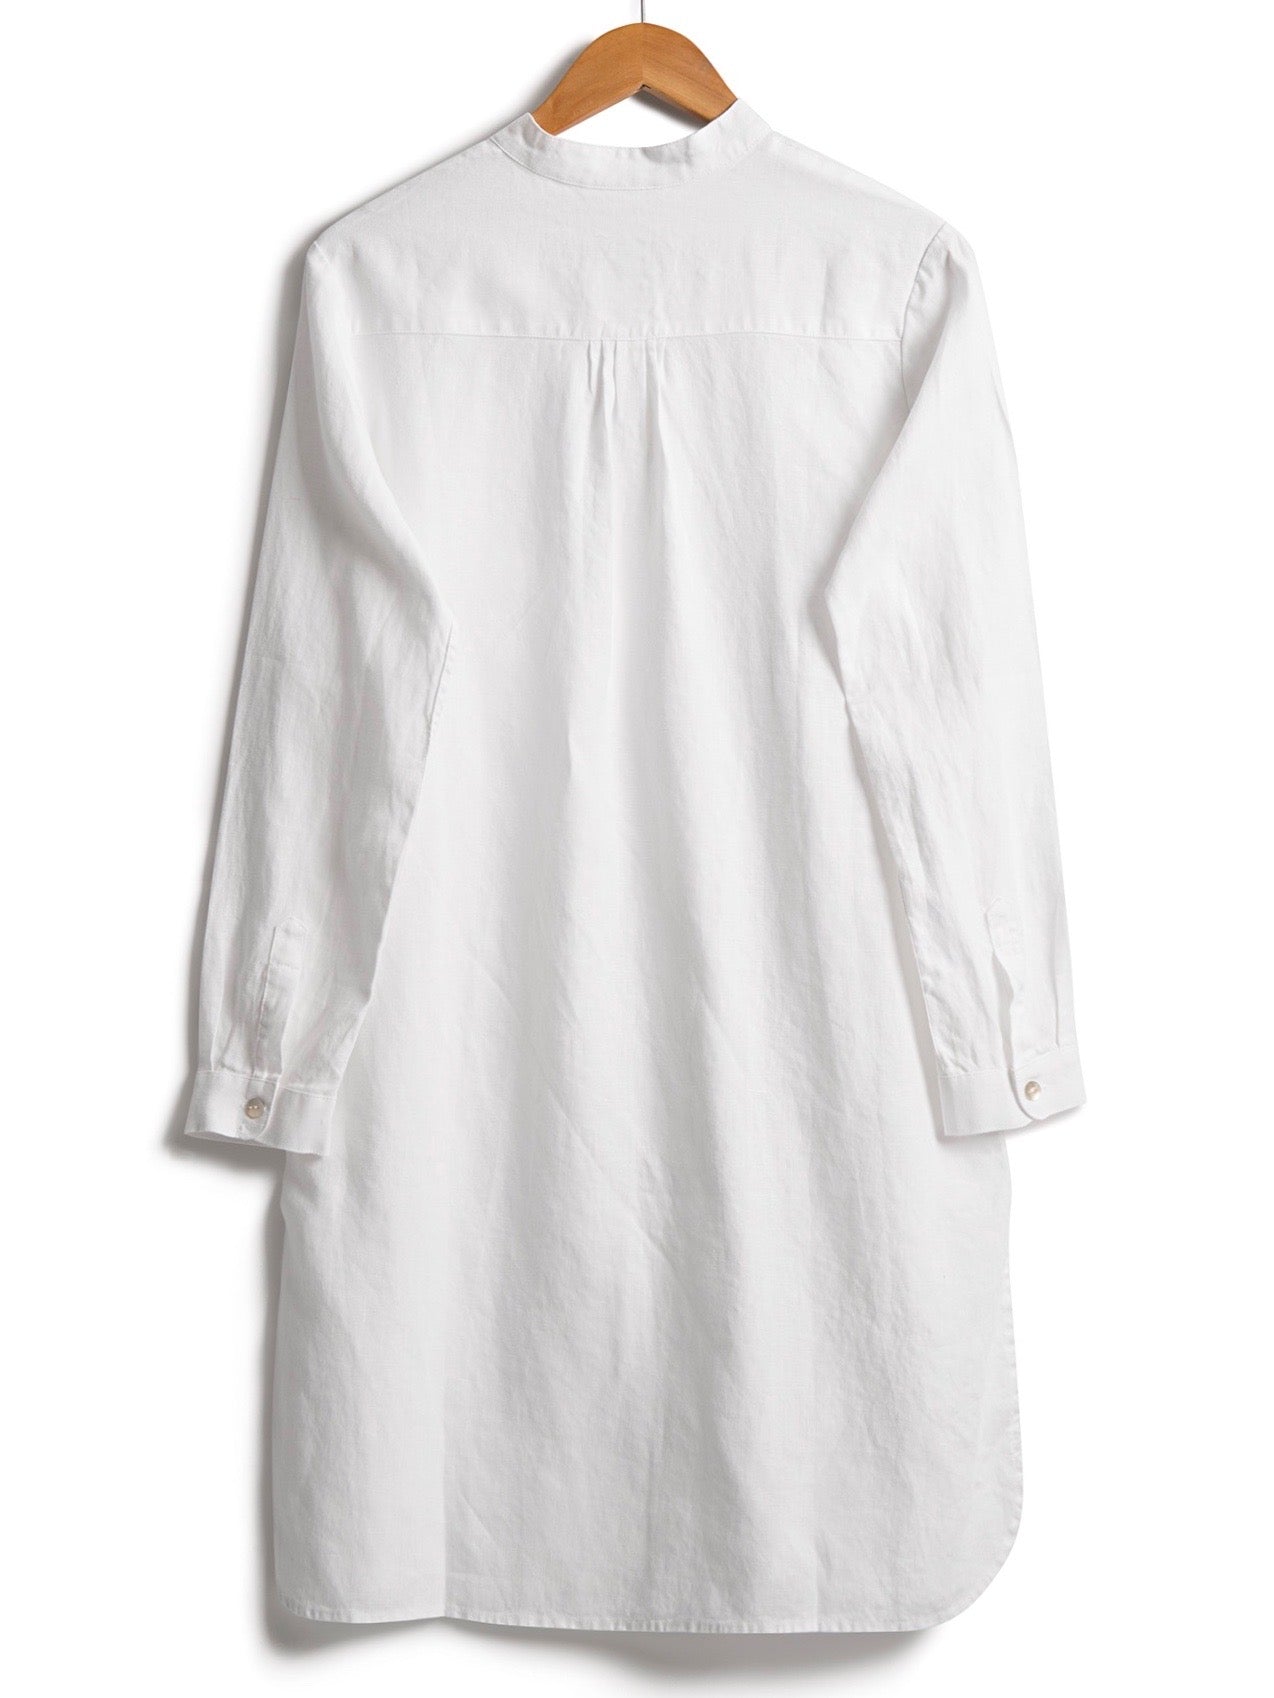 Long-line White Linen Tunic, Dress, Hickman & Bousfied - Hickman & Bousfield, Safari and Travel Clothing